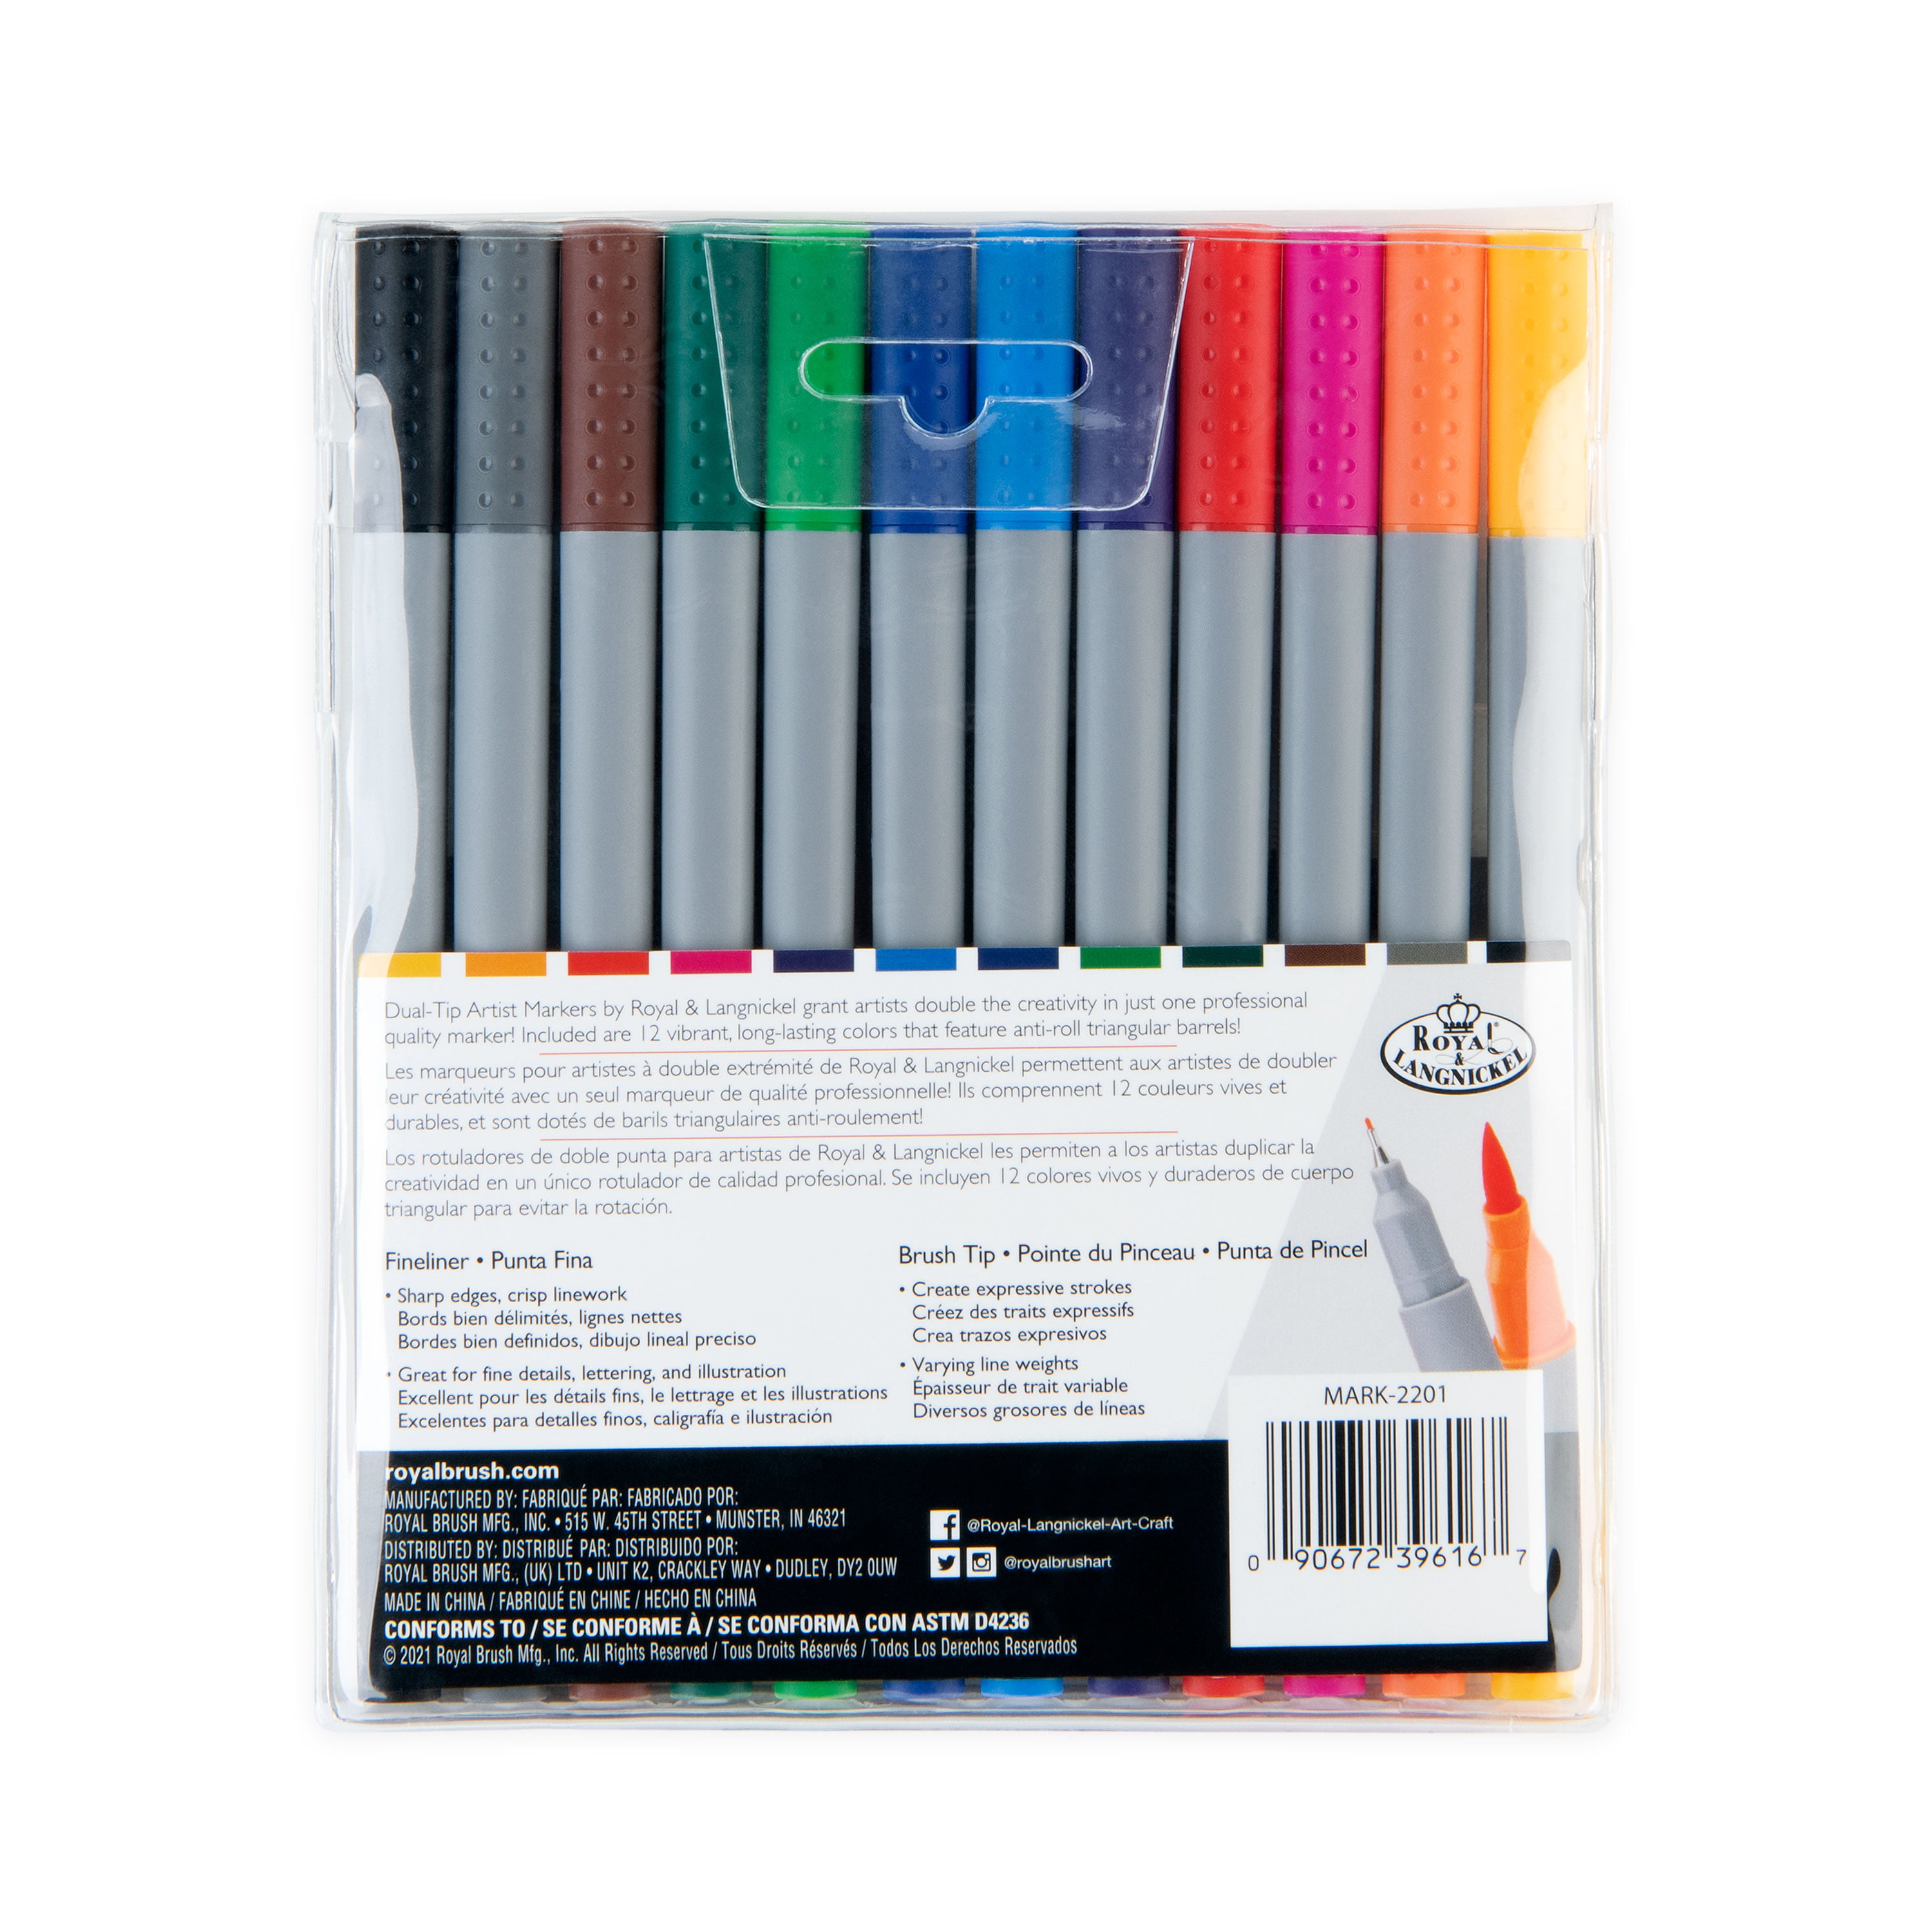 Royal & Langnickel Fineliner Artist Markers, Assorted Colors, 36pc